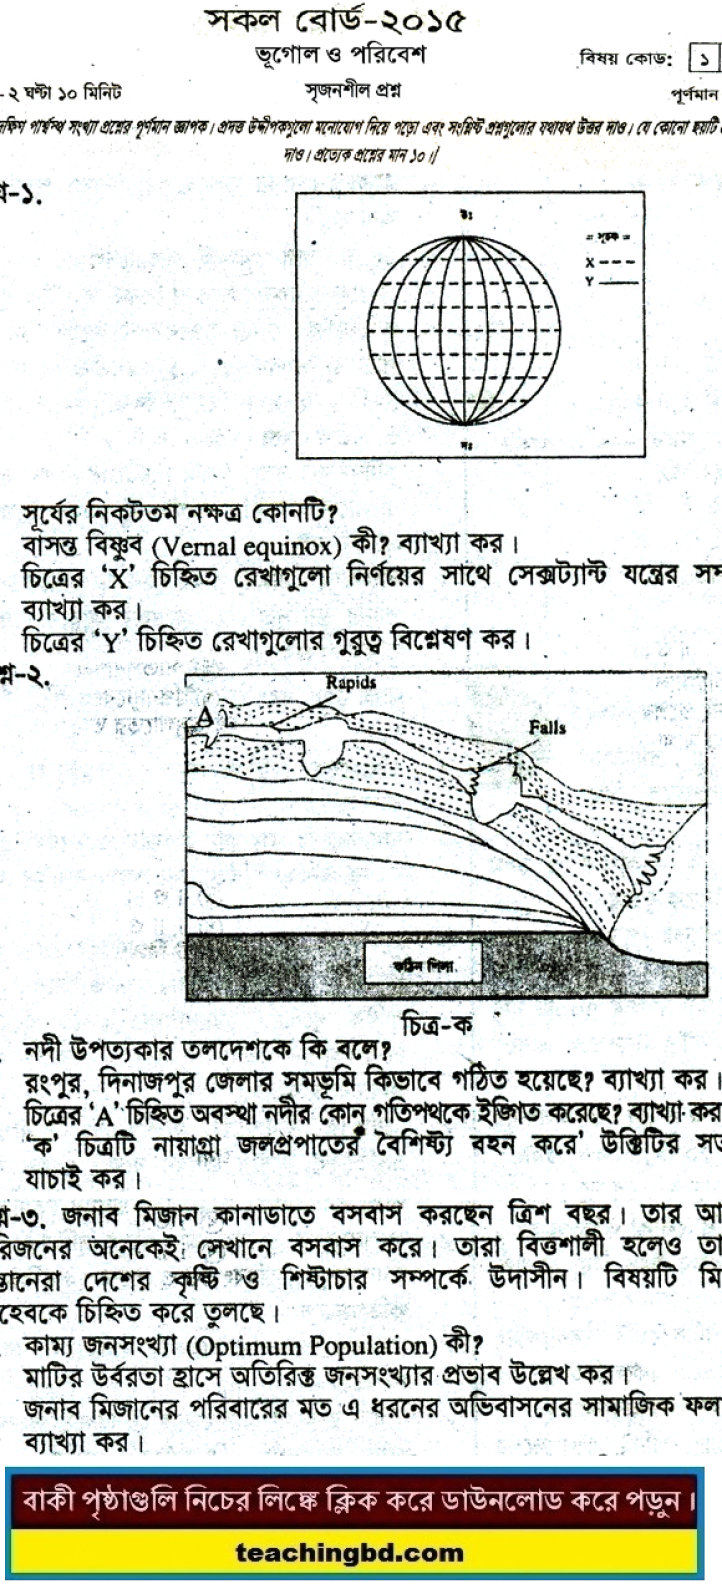 Geography and Environment Board Question 2015 All Board